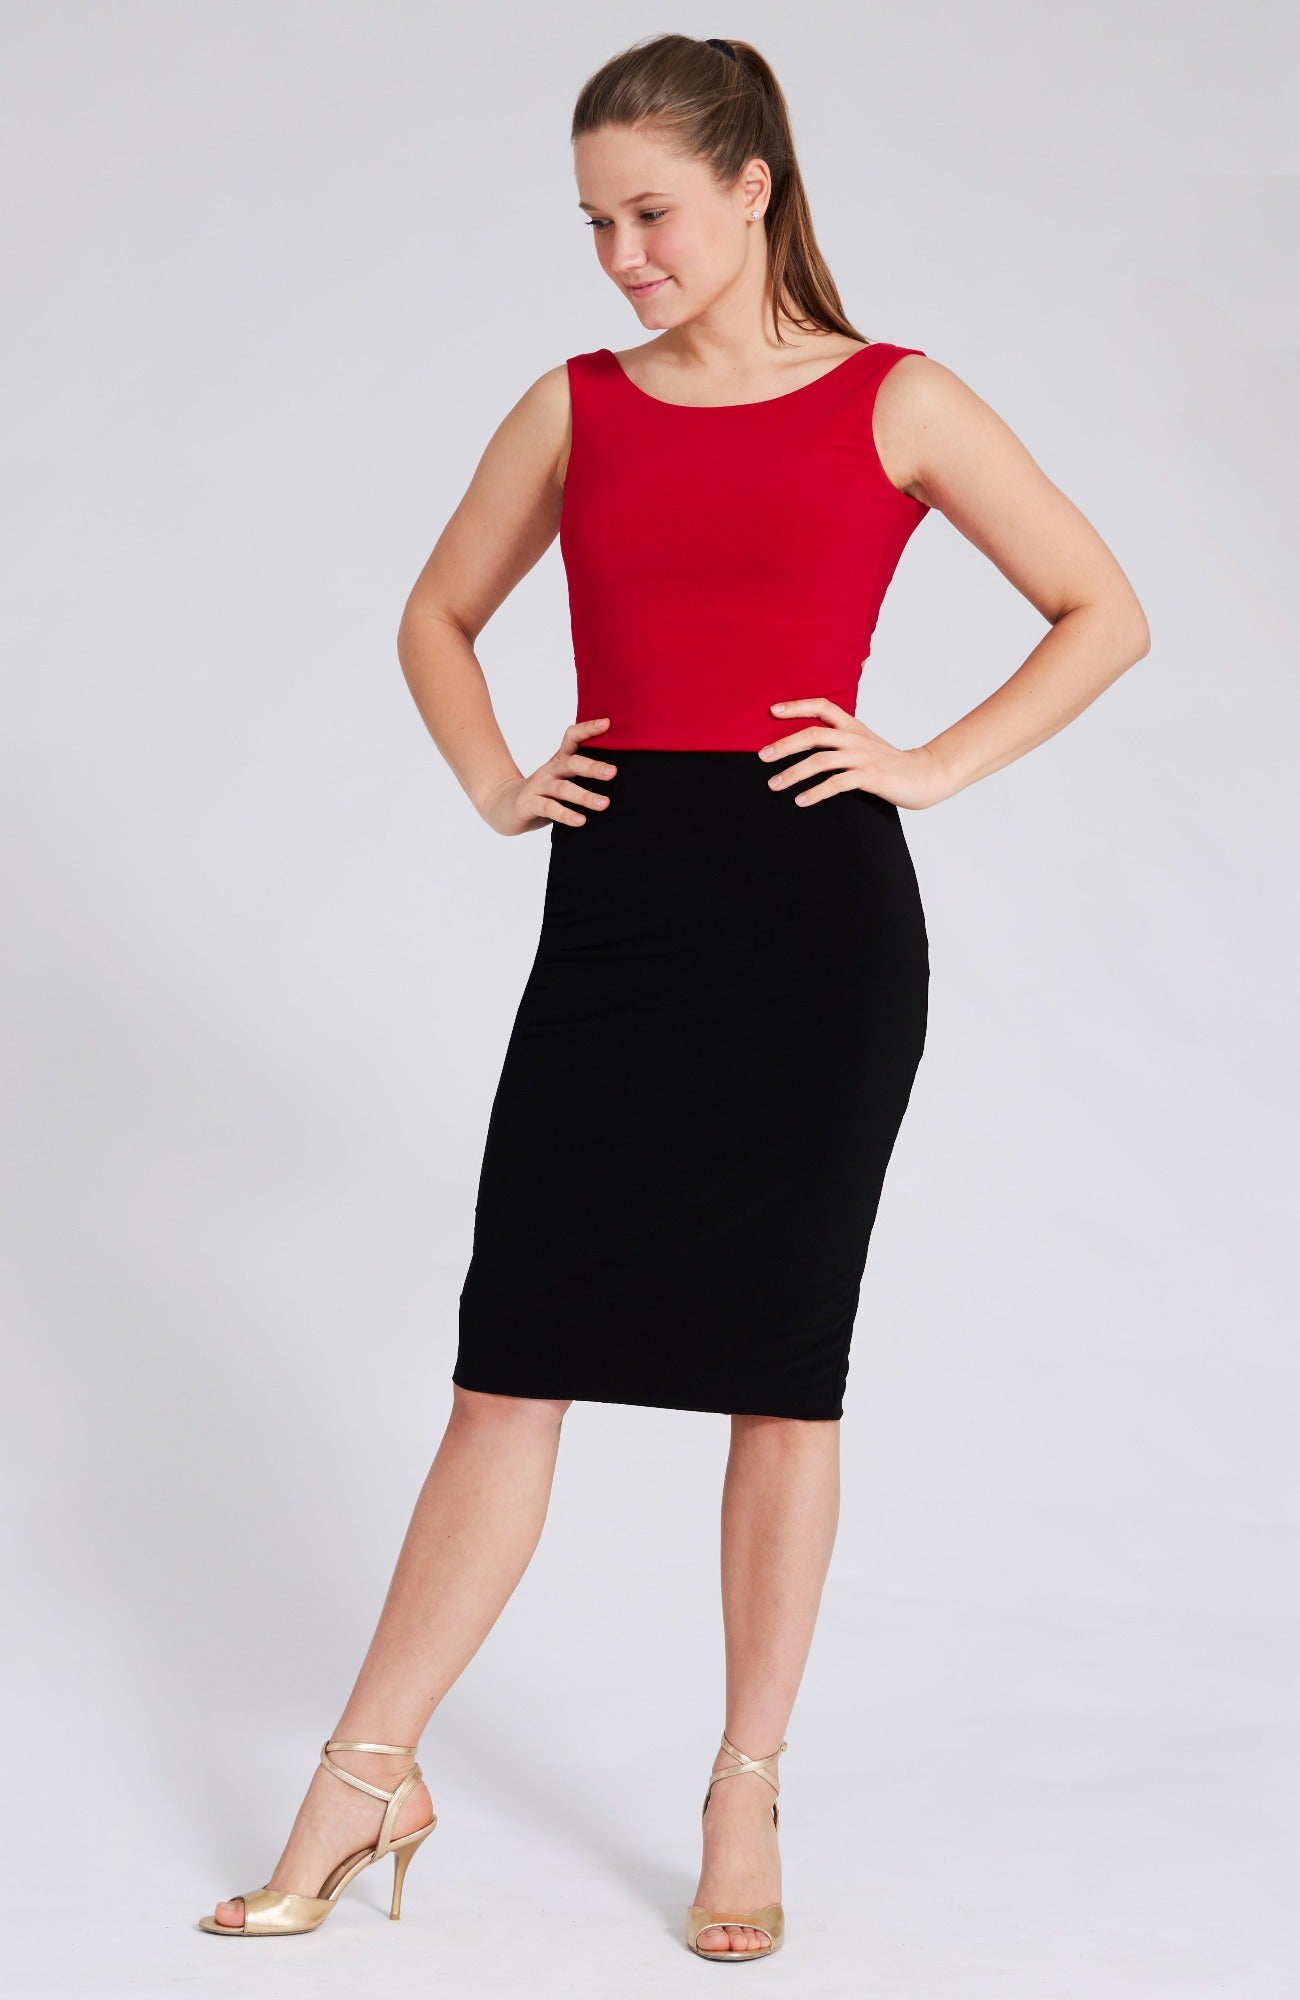 black tango skirt and red crop top